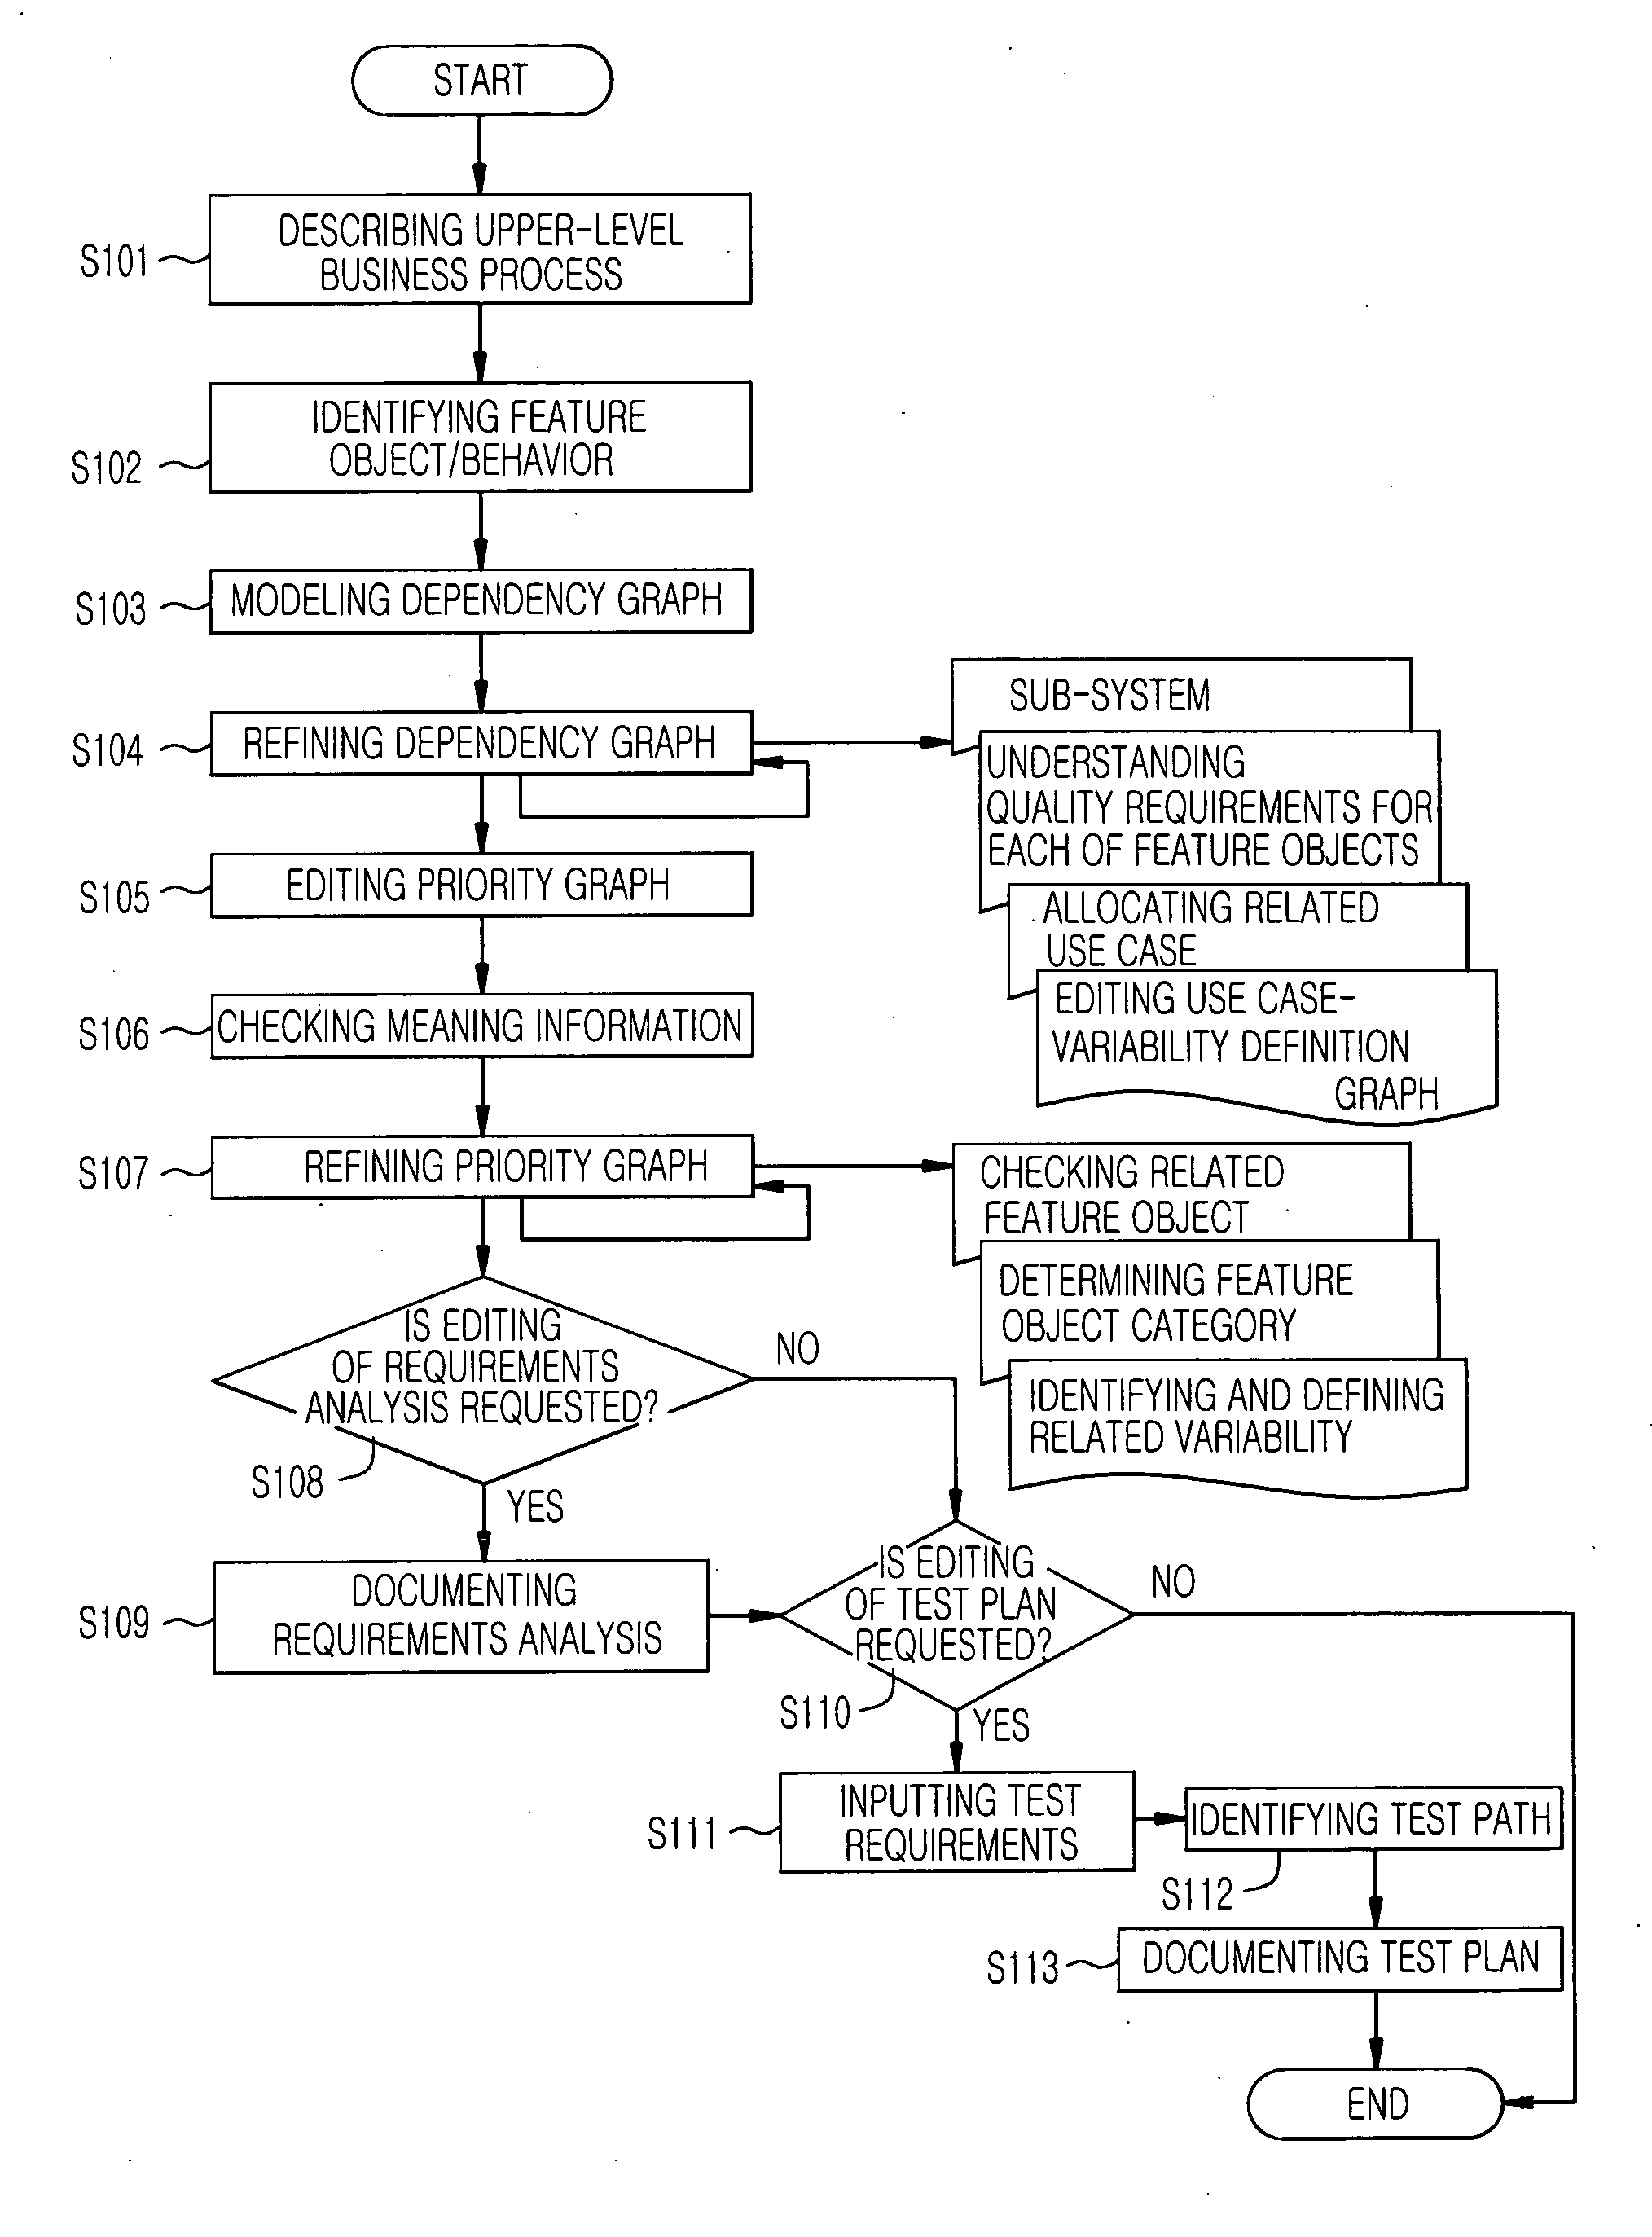 Method and apparatus for analyzing functionality and test paths of product line using a priority graph